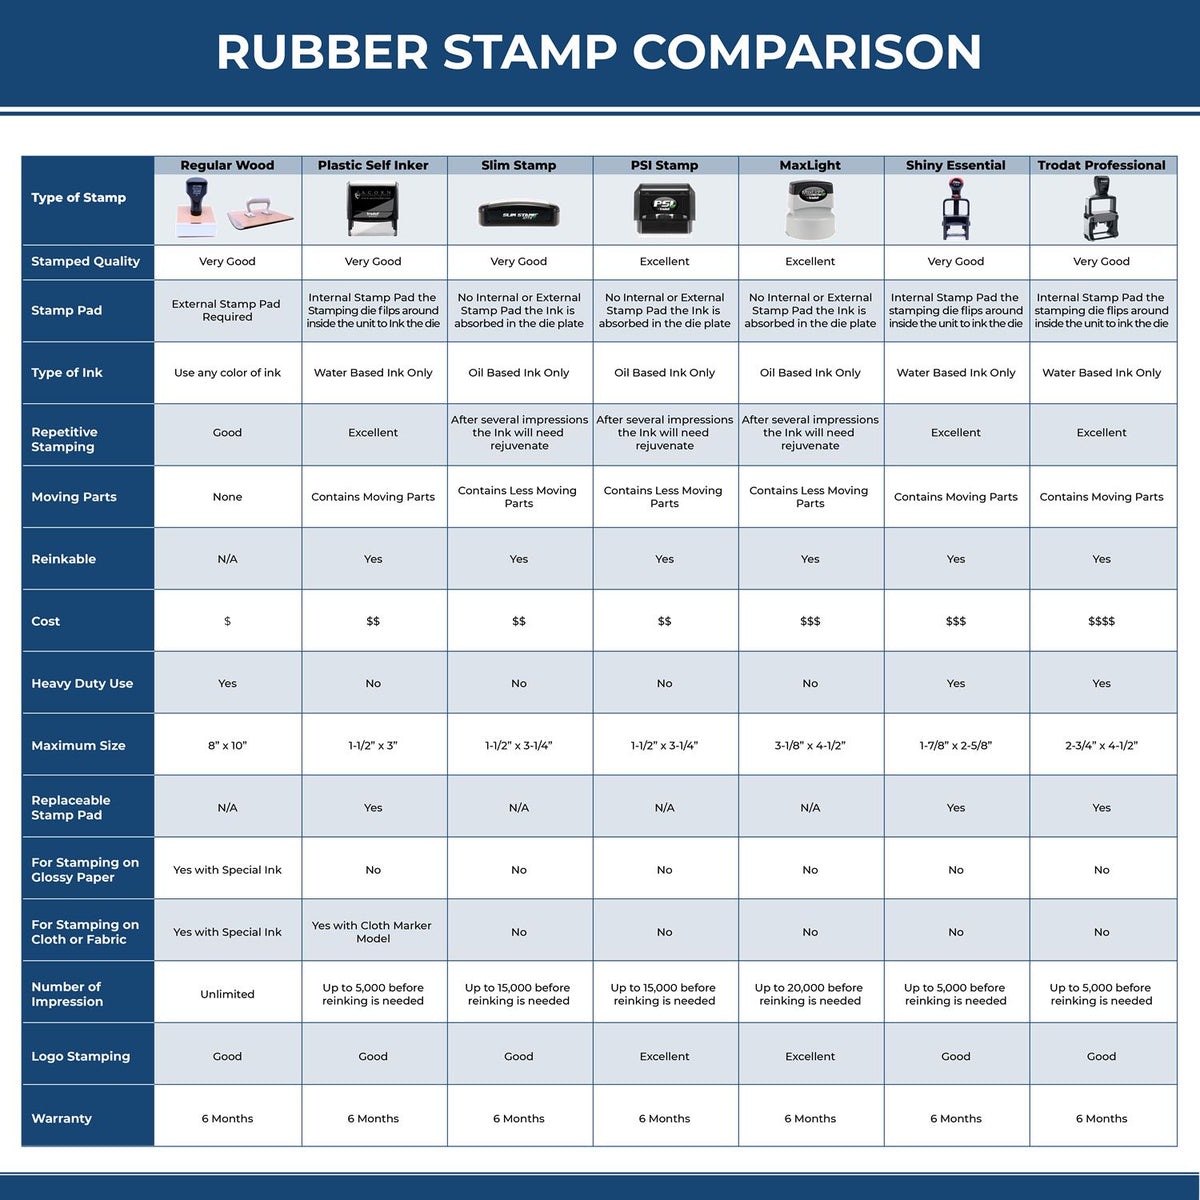 Large Shelter in Place Rubber Stamp 5505R Rubber Stamp Comparison